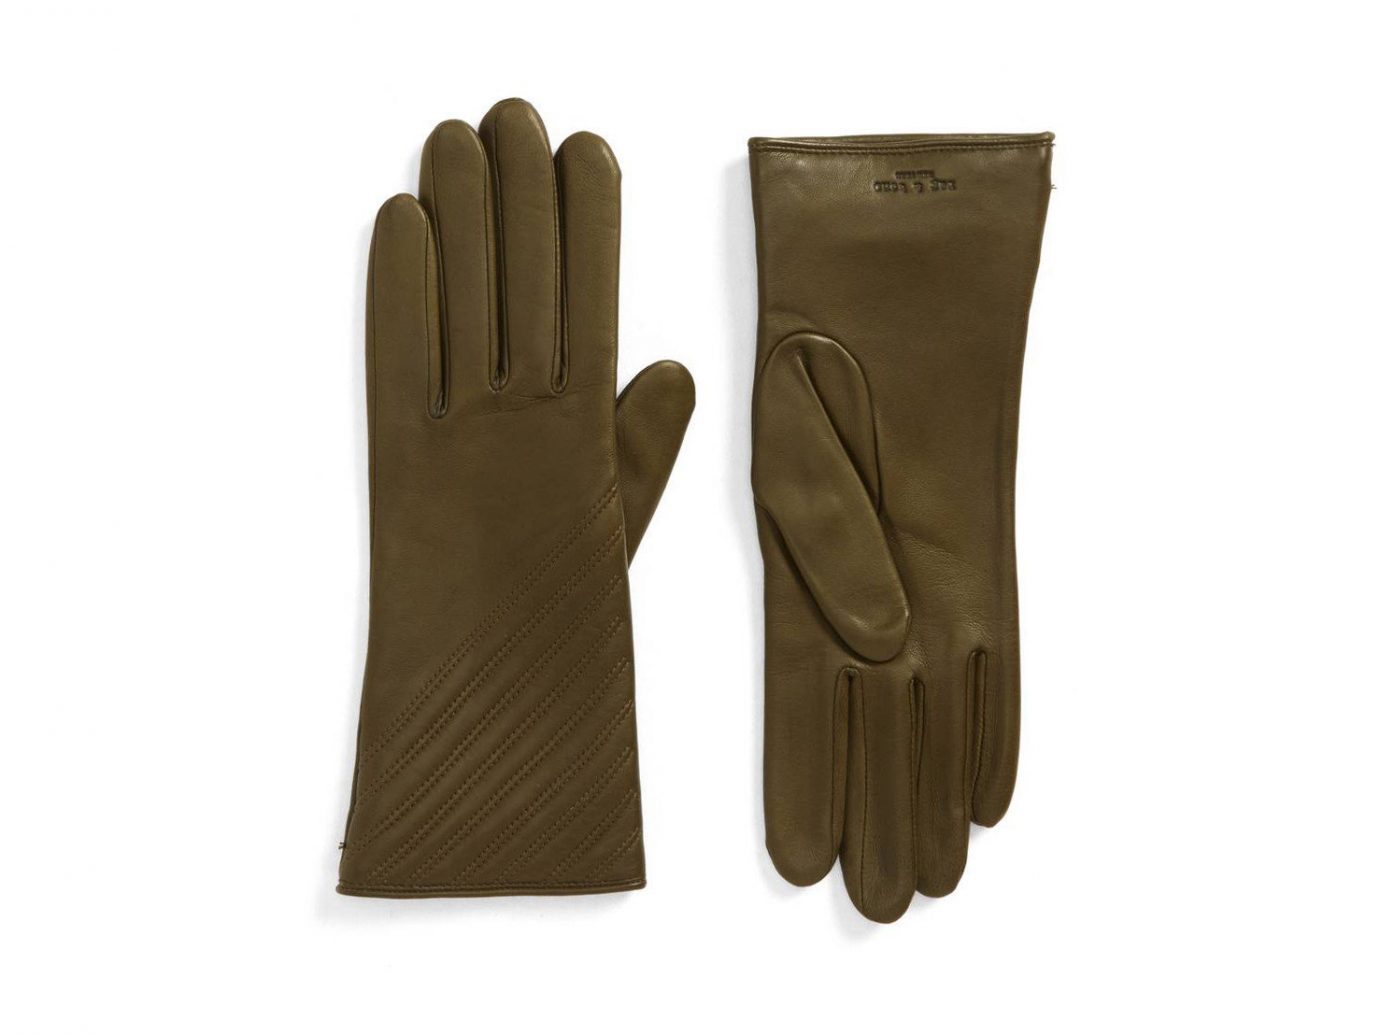 Trip Ideas handwear clothing safety glove glove bicycle glove product product design